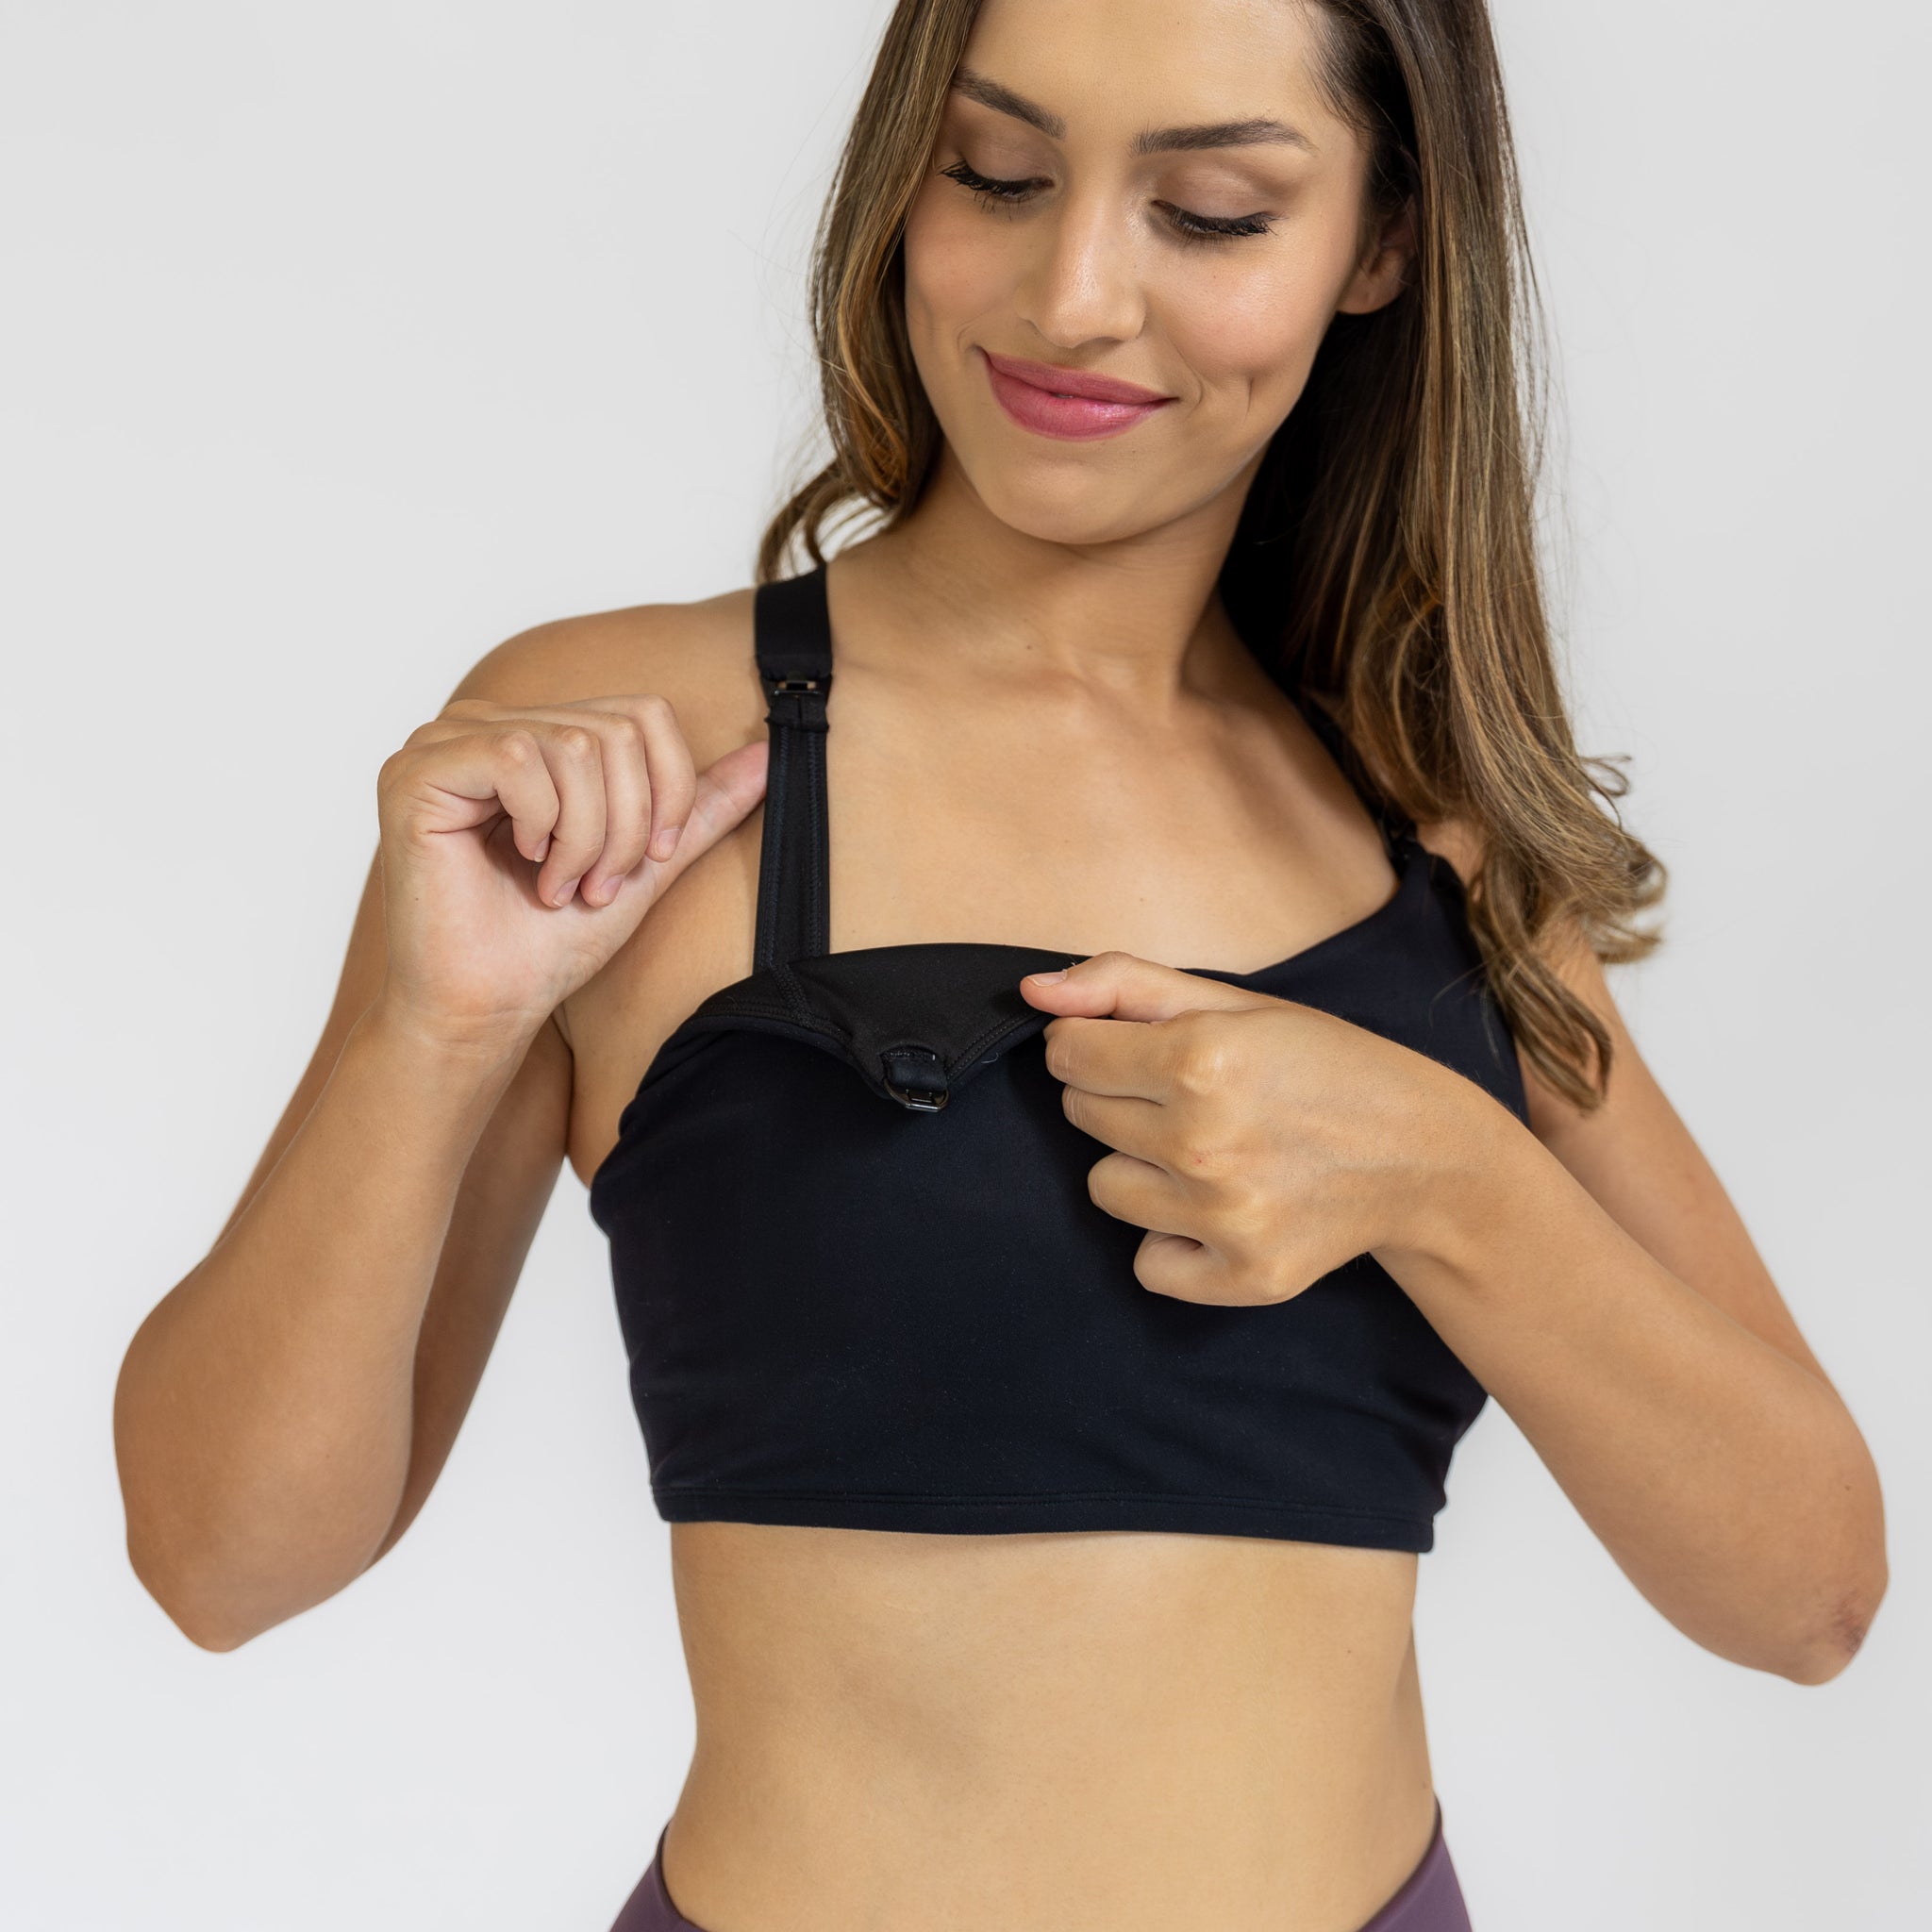 We are getting amazing reviews on our Cadence Nursing & Pumping bra! #1  thing is the super soft fabric and support! If your tired of pump